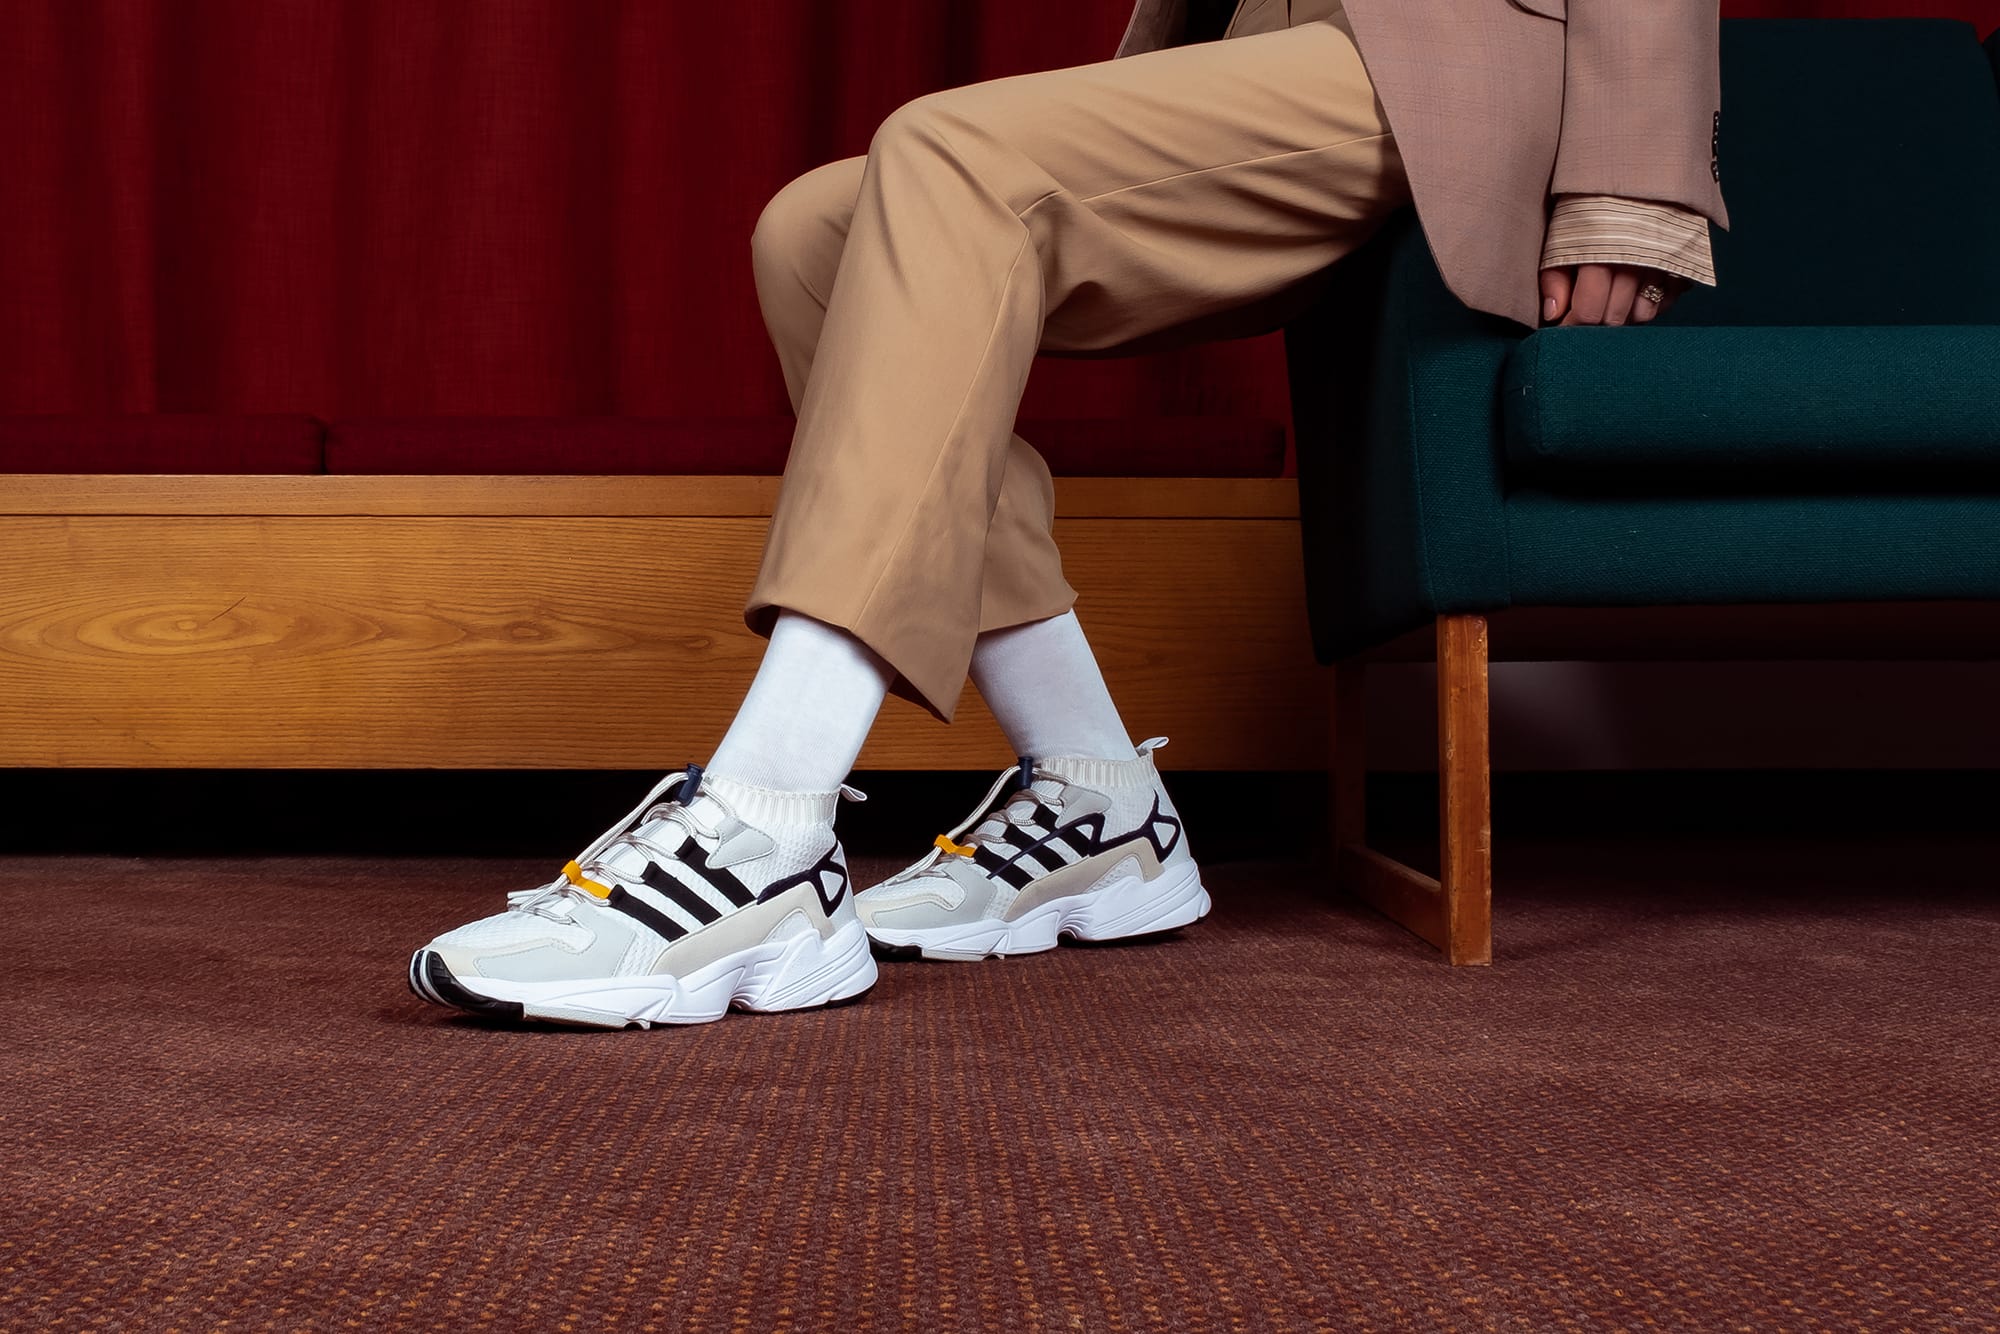 ADIDAS CONSORTIUM WORKSHOP AW18 – LAUNCHING 8TH AUGUST